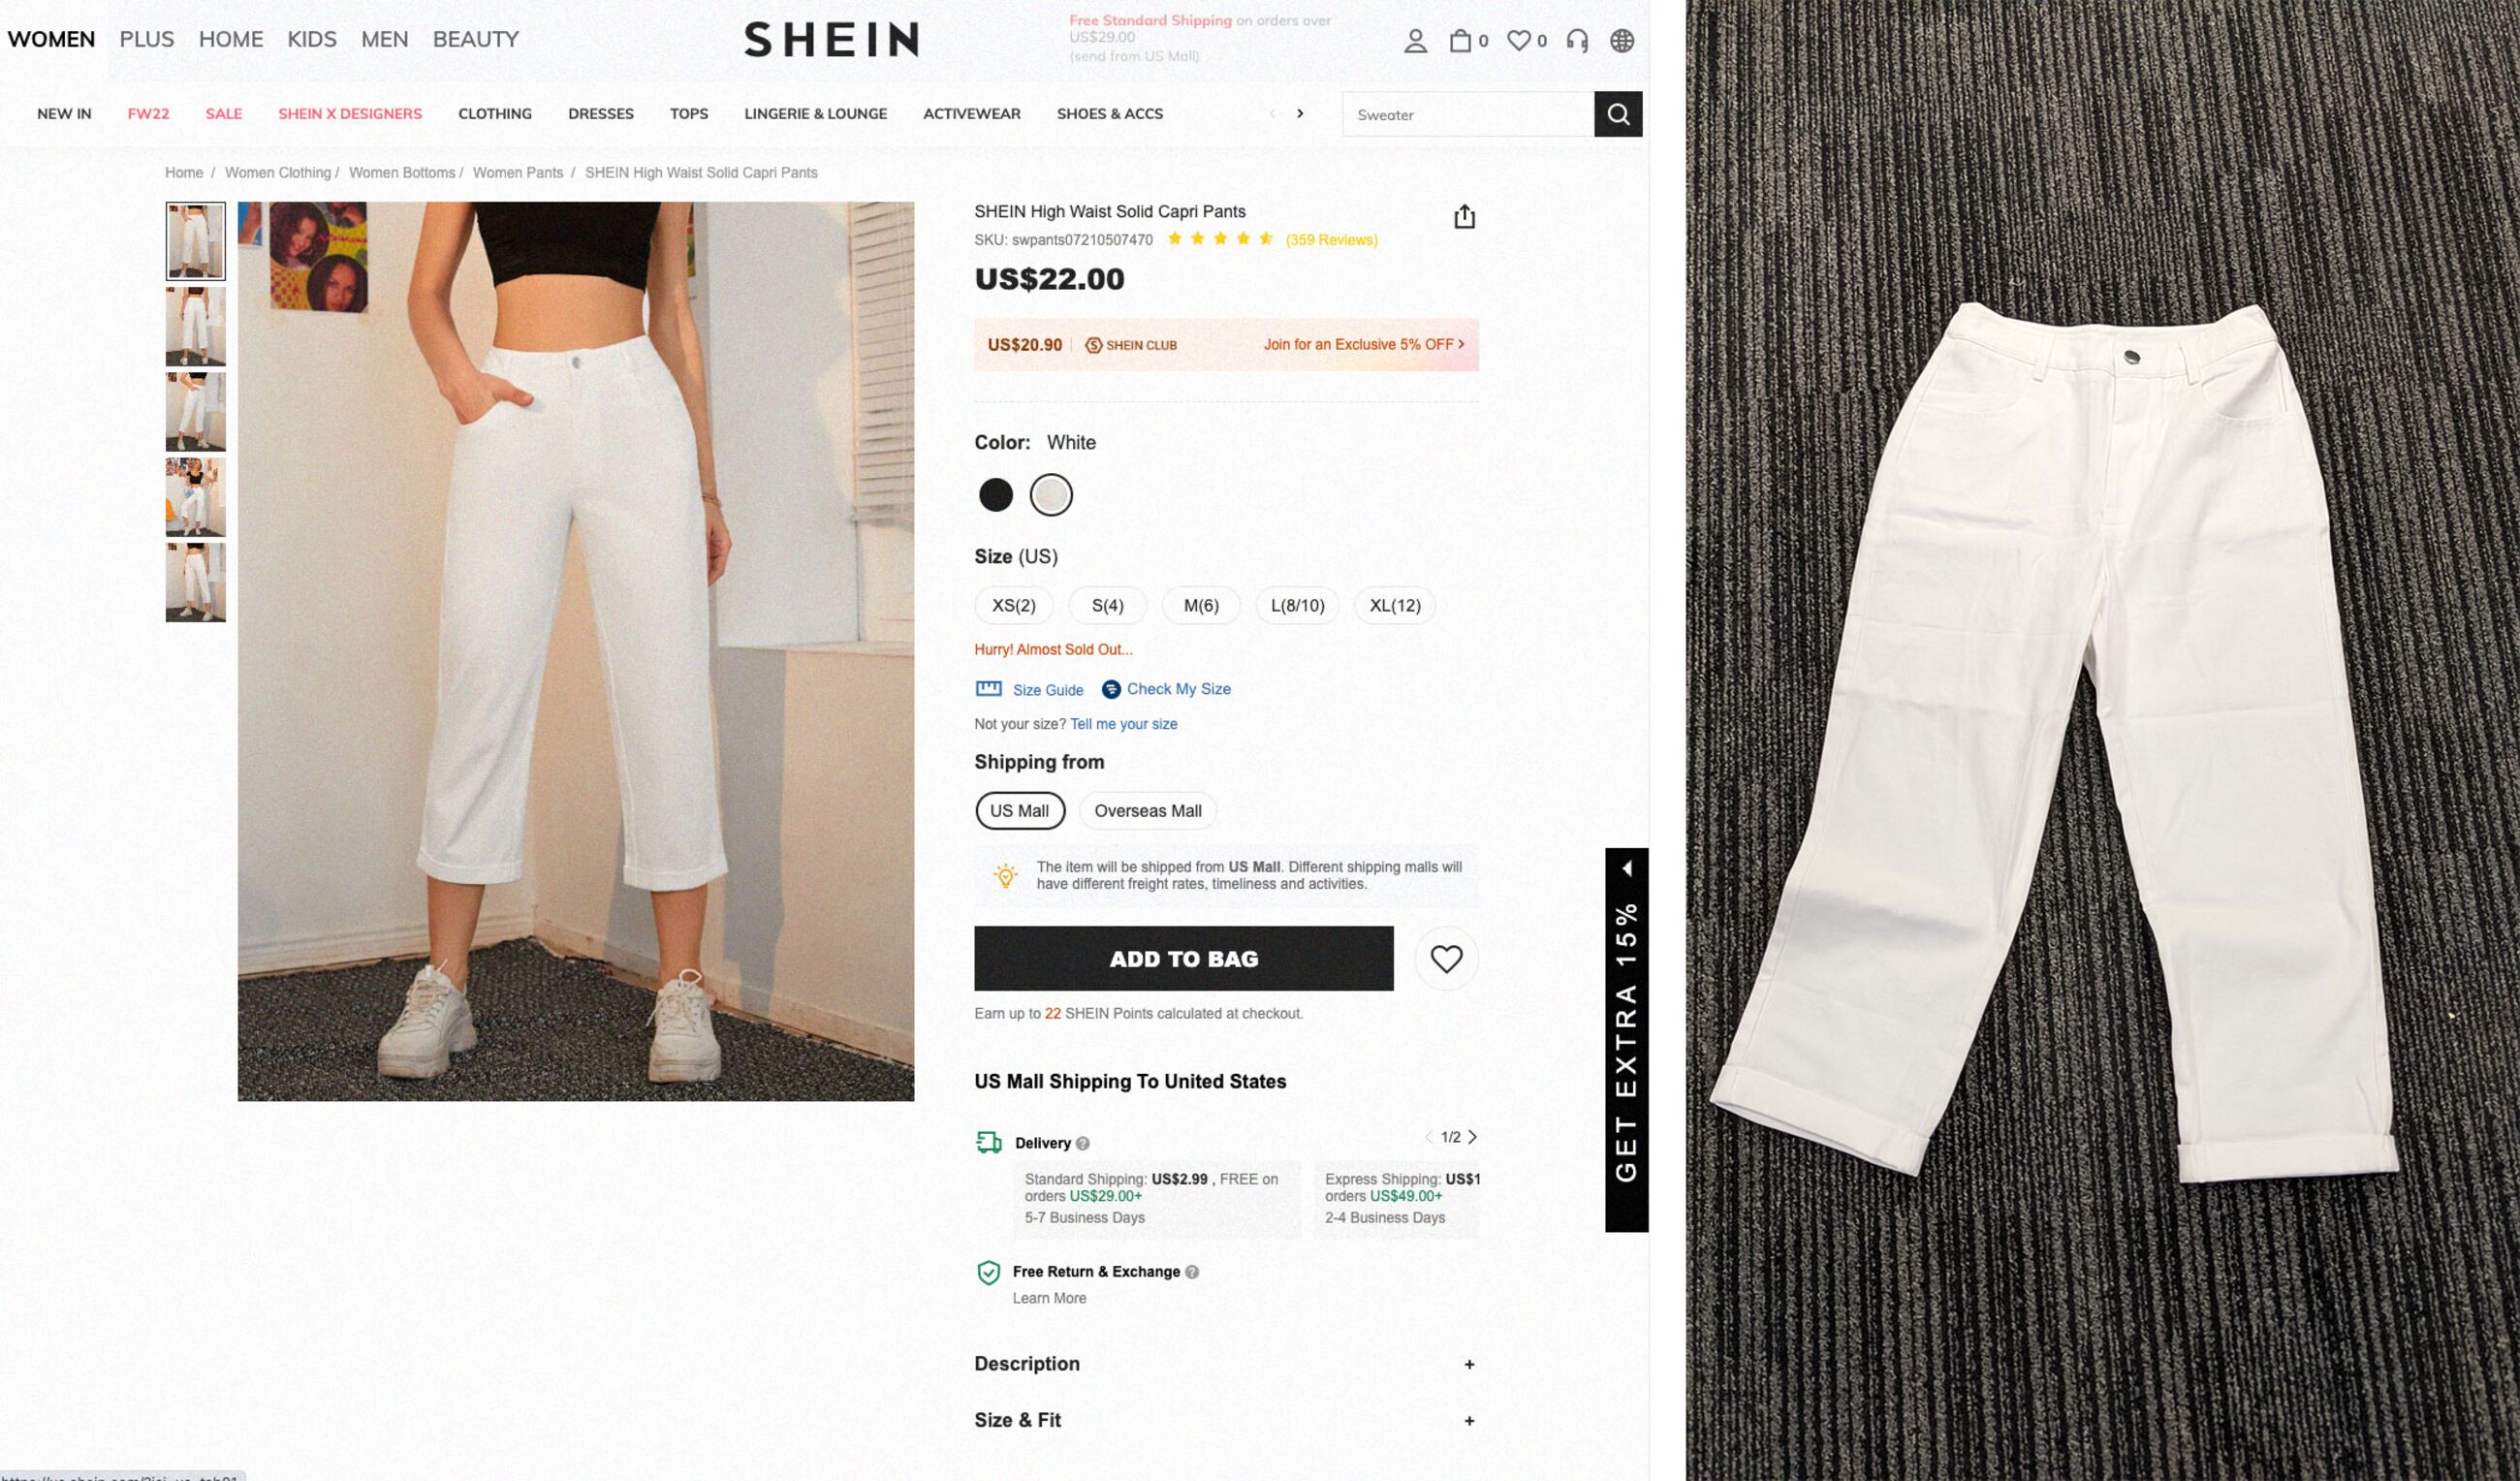 Shein’s Cotton Tied to Chinese Region Accused of Forced Labor - Human ...